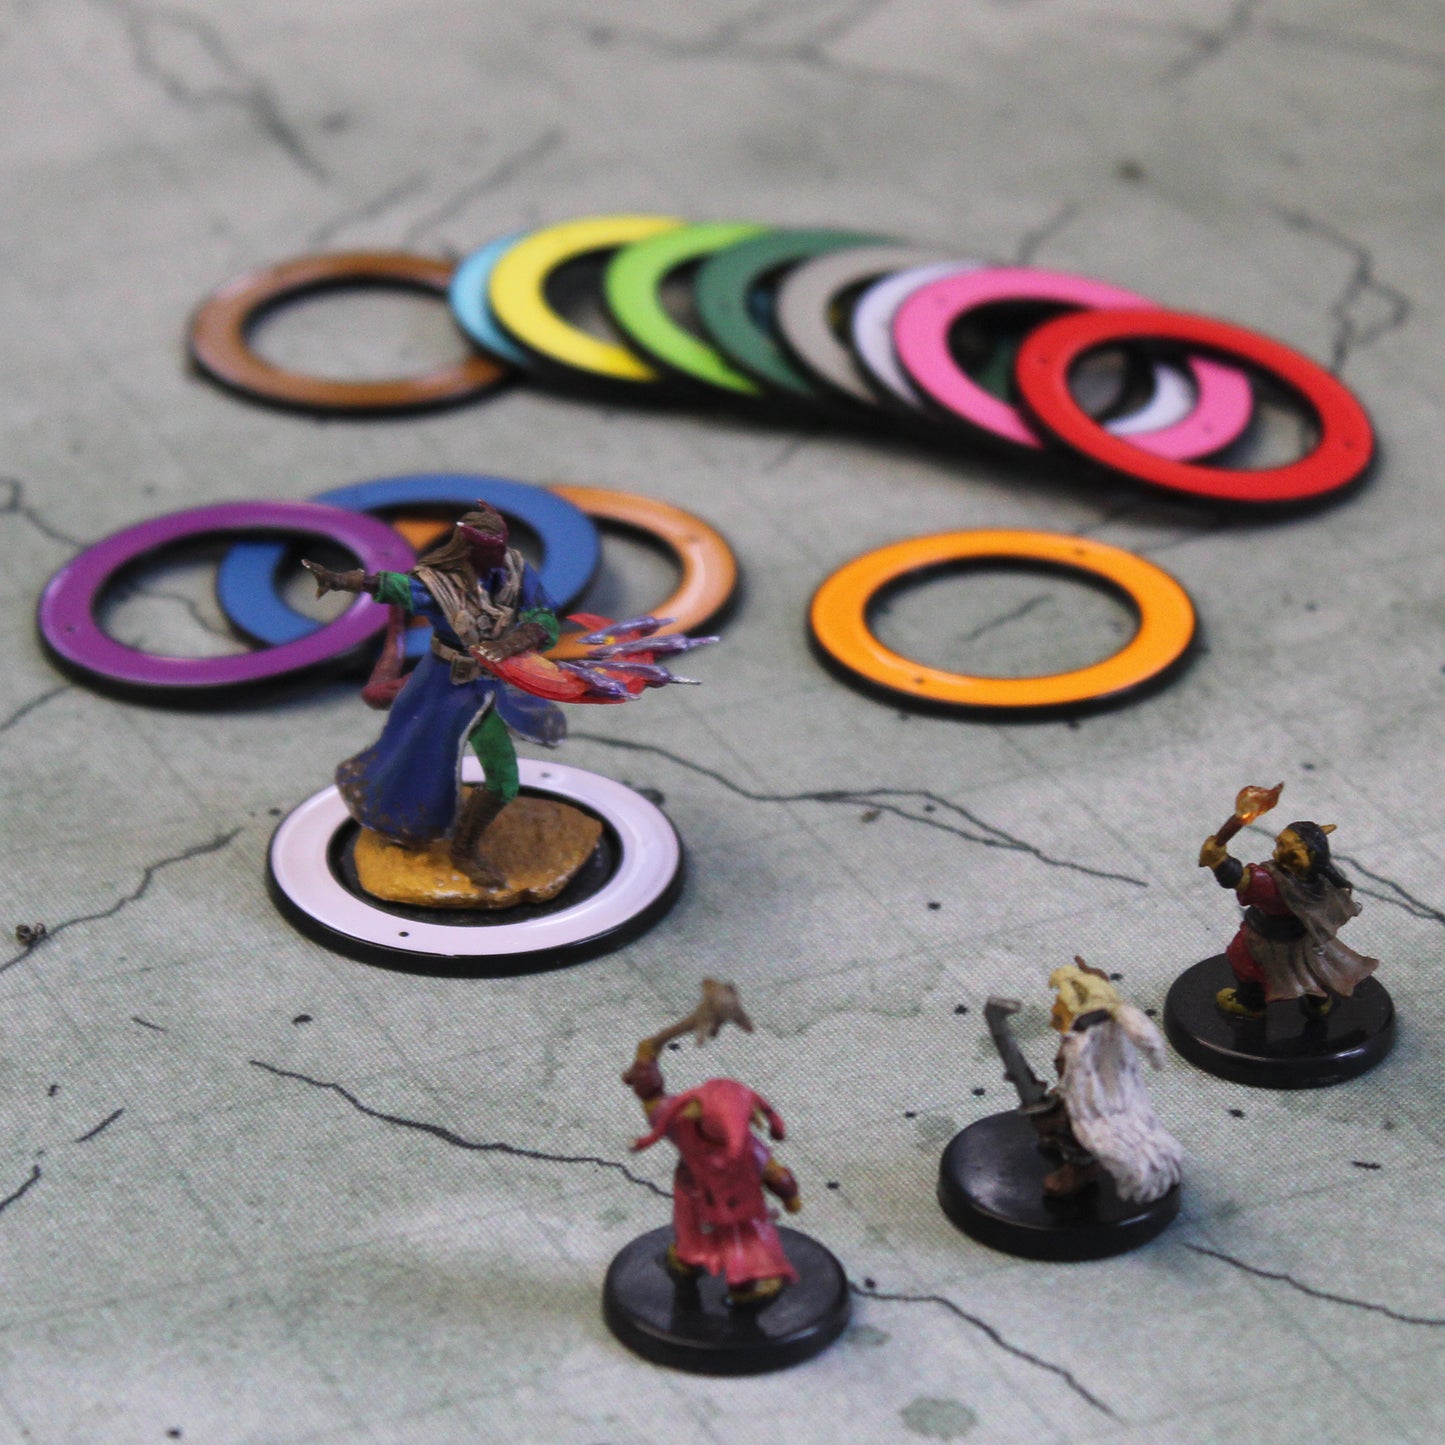 Text-Free Rings for Dungeons and Dragons for marking status.